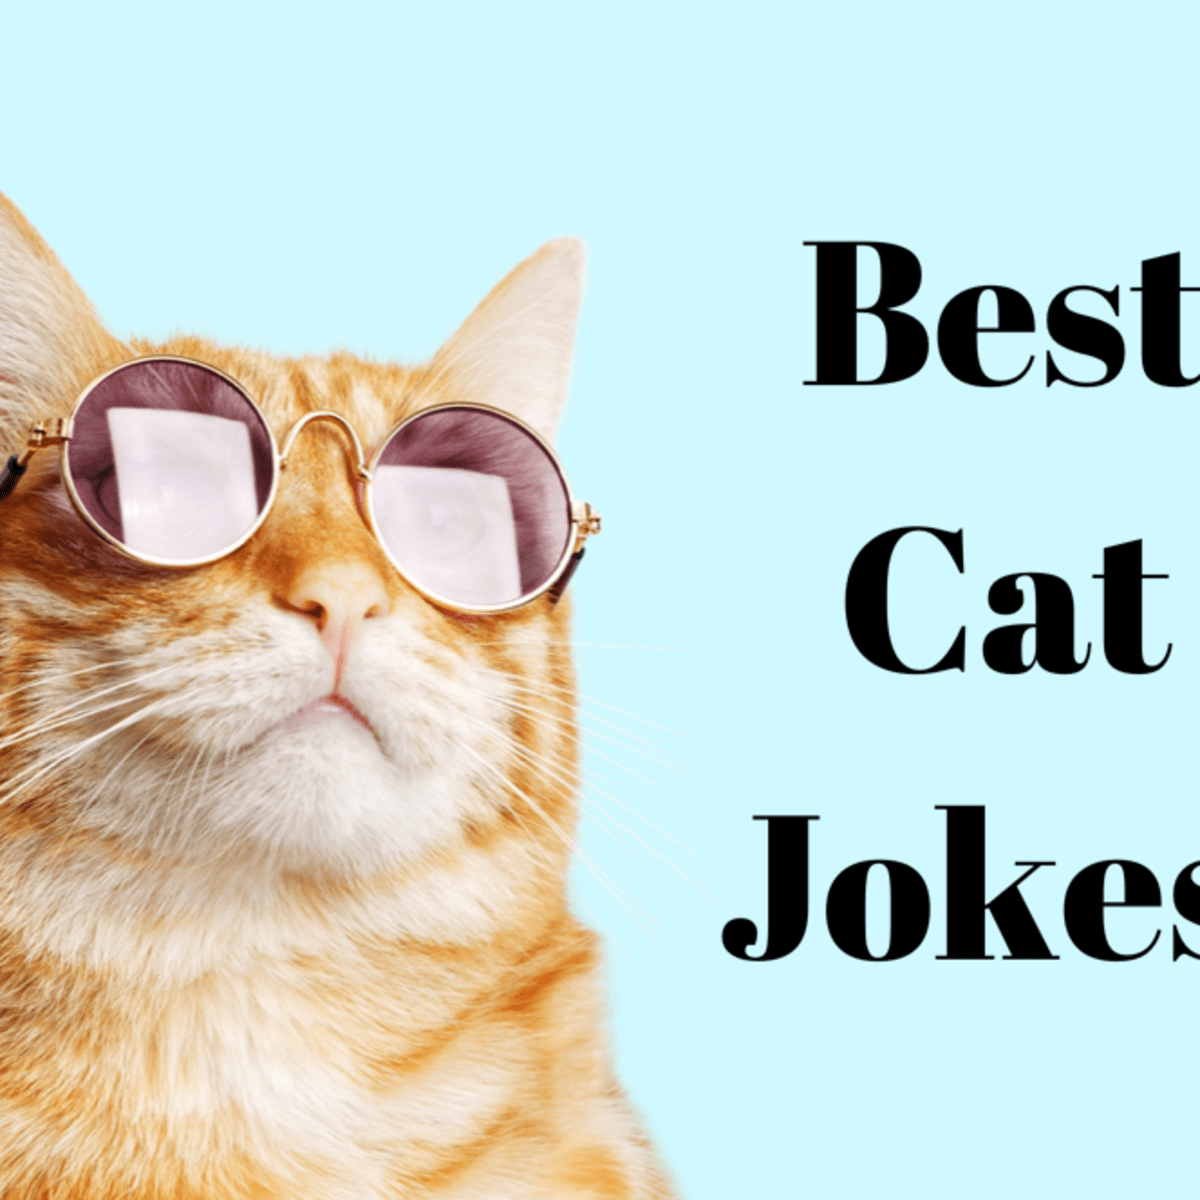 Things For Cats, Lol Cats, Cute Cats Funny, Cat Quotes